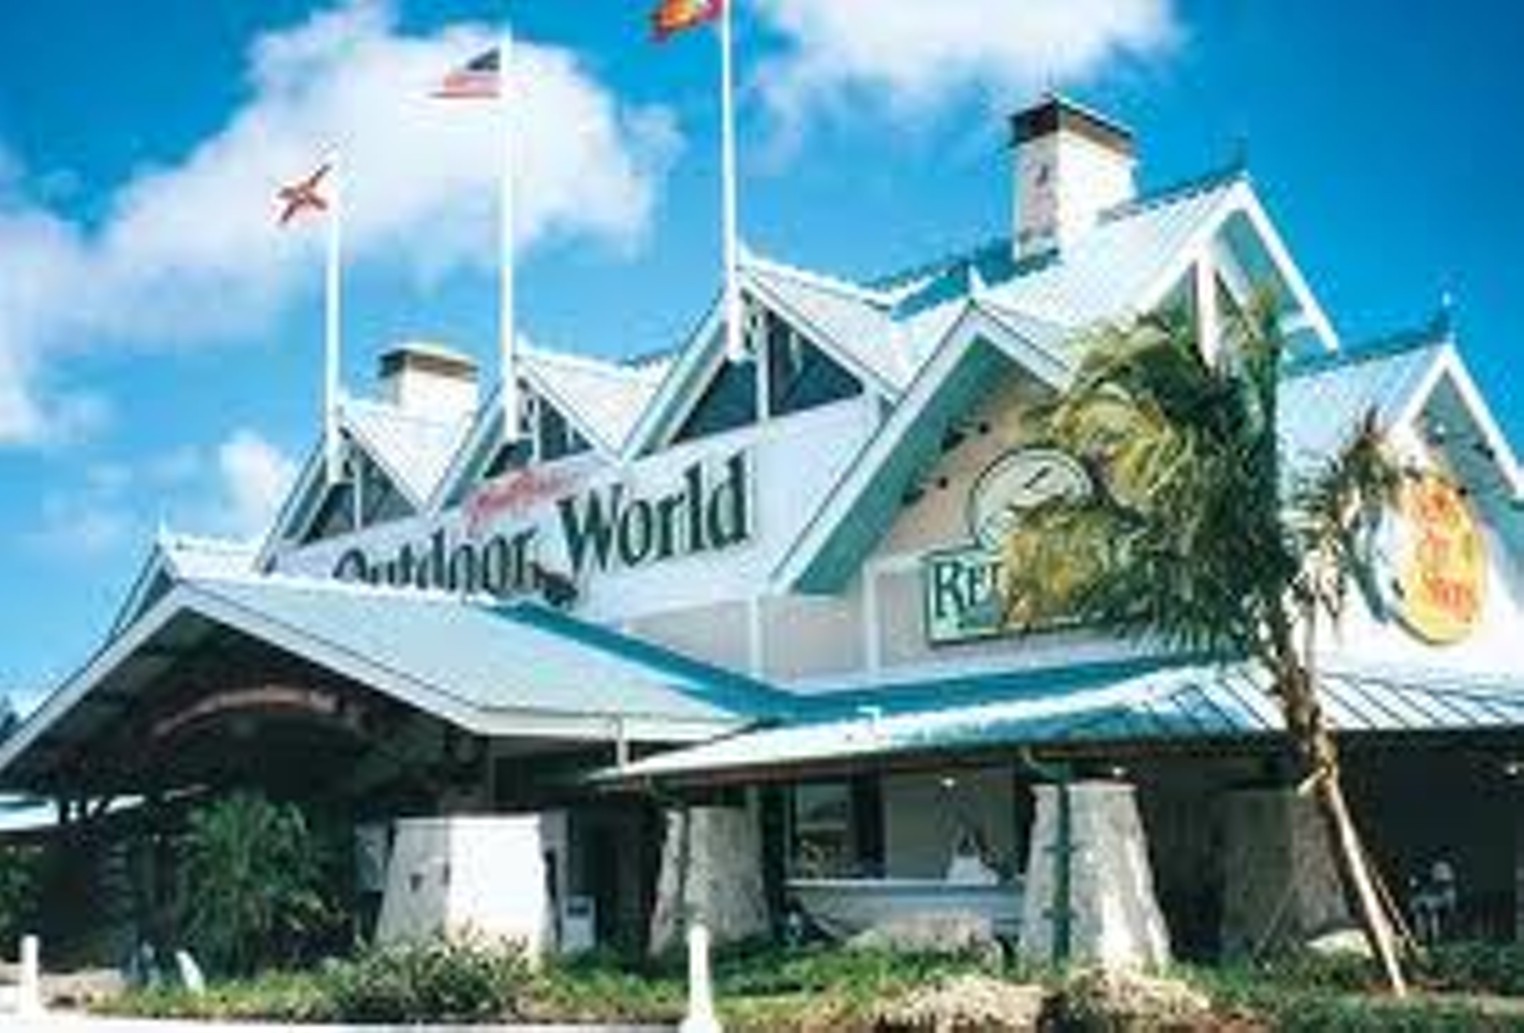 Best Store For Fishing Gear 2000 Bass Pro Shops Outdoor World Shopping and Services South Florida picture